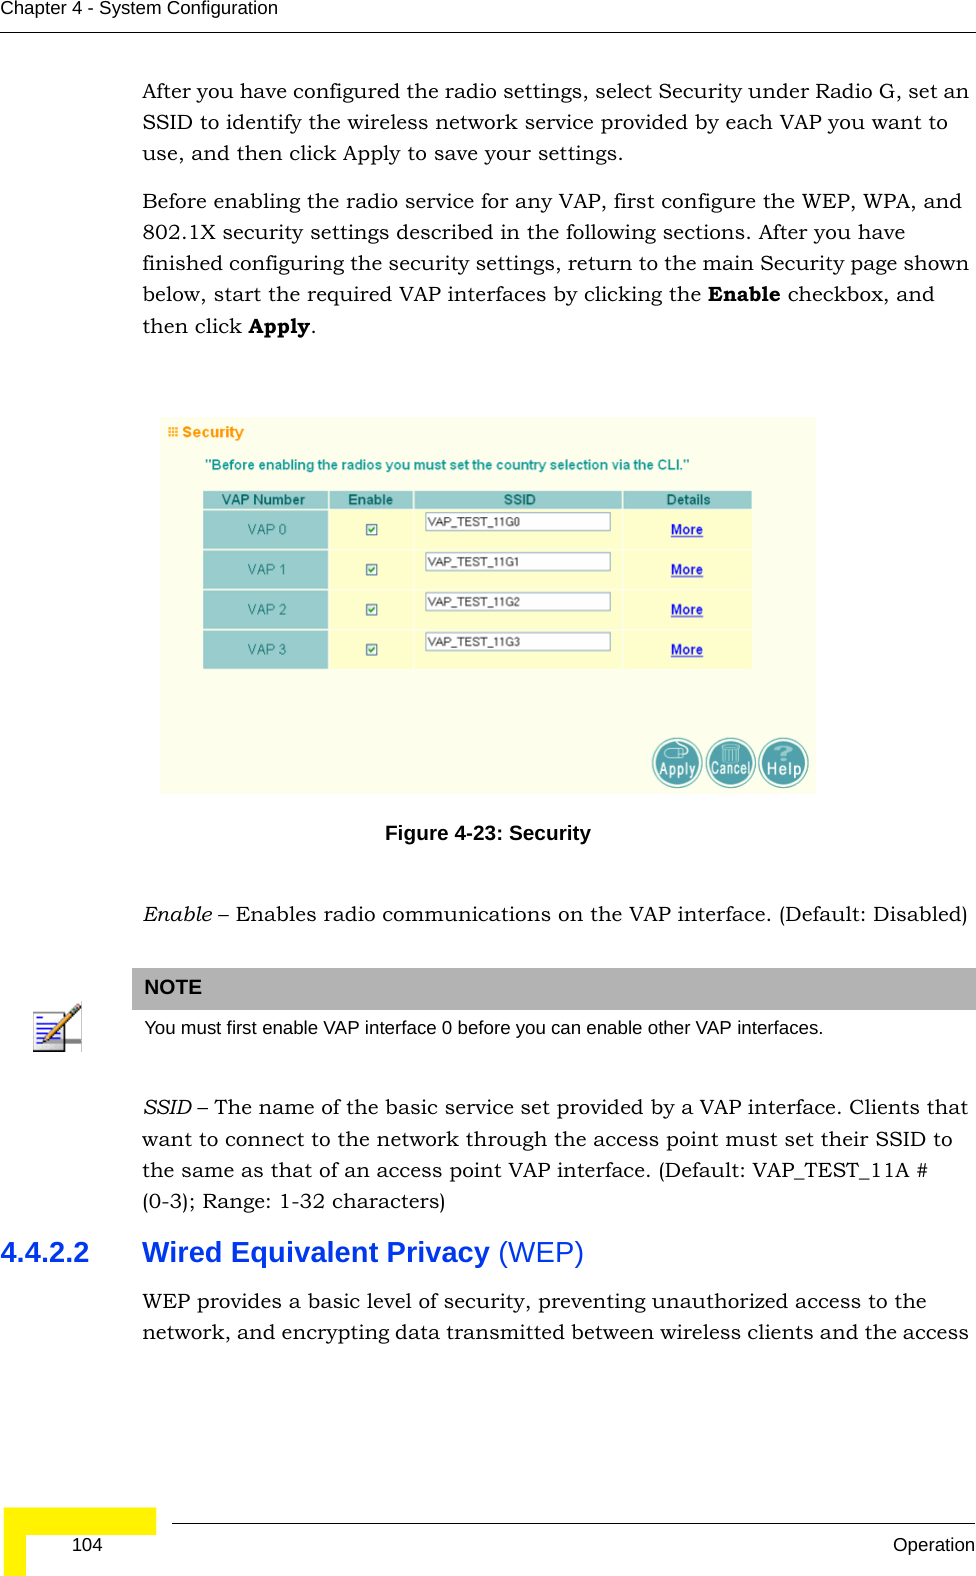  104 OperationChapter 4 - System ConfigurationAfter you have configured the radio settings, select Security under Radio G, set an SSID to identify the wireless network service provided by each VAP you want to use, and then click Apply to save your settings. Before enabling the radio service for any VAP, first configure the WEP, WPA, and 802.1X security settings described in the following sections. After you have finished configuring the security settings, return to the main Security page shown below, start the required VAP interfaces by clicking the Enable checkbox, and then click Apply.  Enable – Enables radio communications on the VAP interface. (Default: Disabled)SSID – The name of the basic service set provided by a VAP interface. Clients that want to connect to the network through the access point must set their SSID to the same as that of an access point VAP interface. (Default: VAP_TEST_11A # (0-3); Range: 1-32 characters)4.4.2.2 Wired Equivalent Privacy (WEP) WEP provides a basic level of security, preventing unauthorized access to the network, and encrypting data transmitted between wireless clients and the access Figure 4-23: SecurityNOTEYou must first enable VAP interface 0 before you can enable other VAP interfaces.